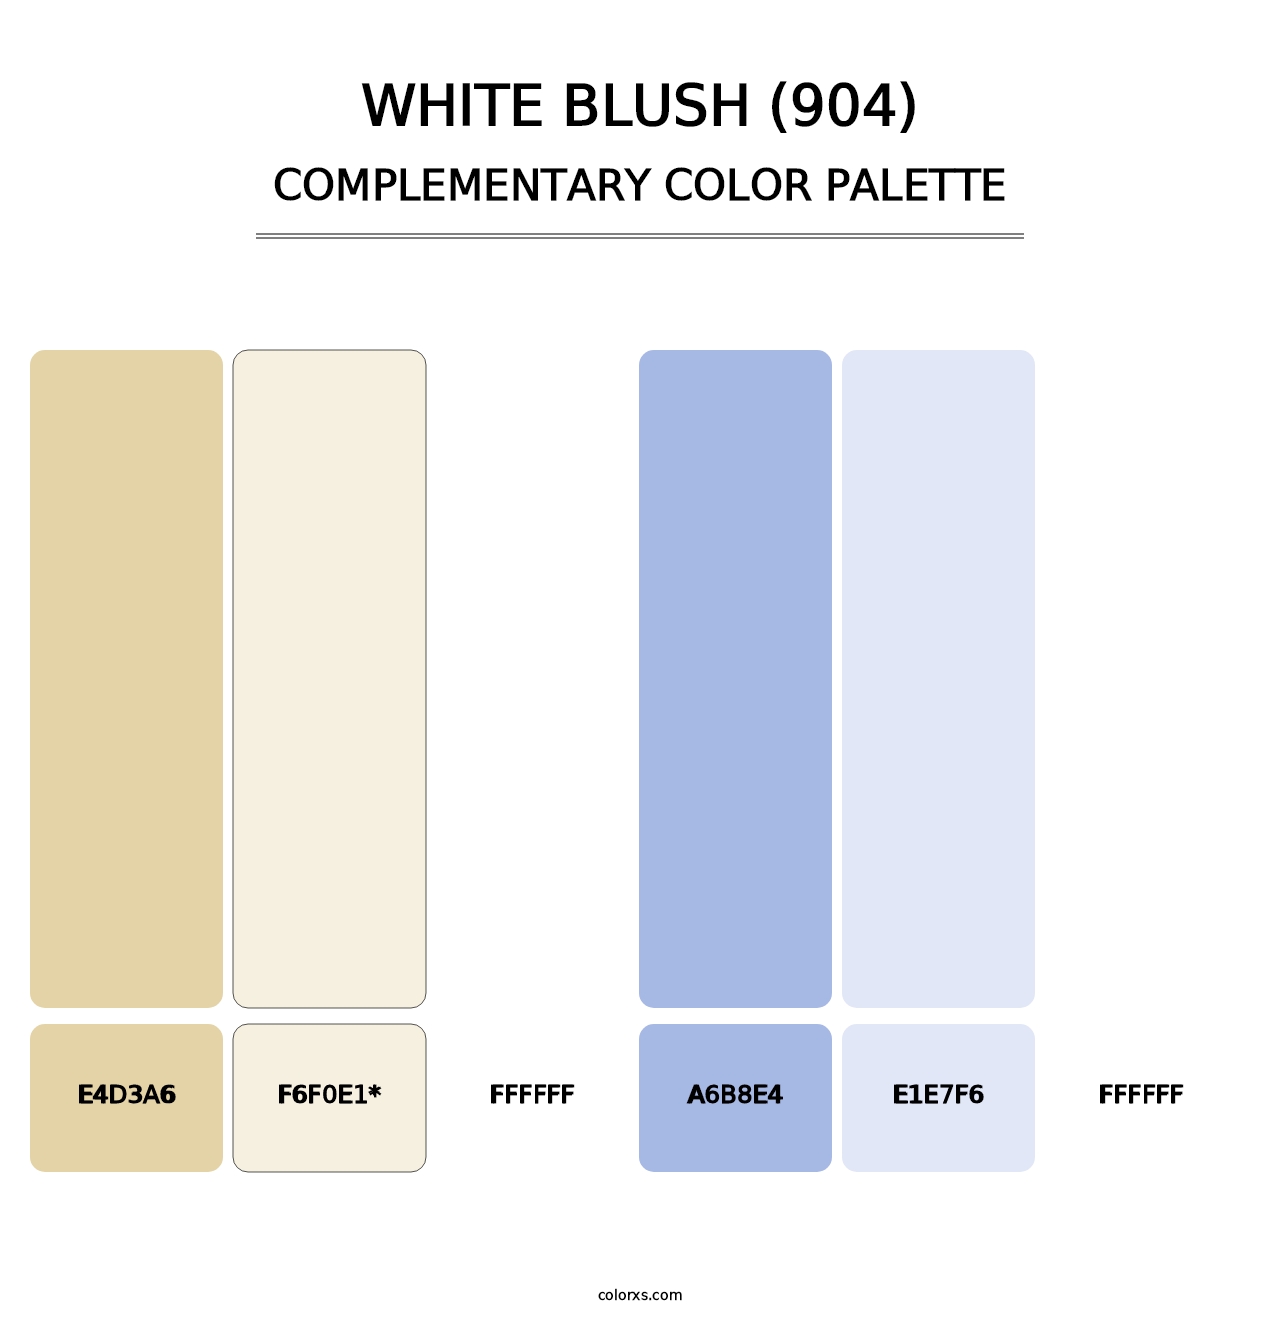 White Blush (904) - Complementary Color Palette